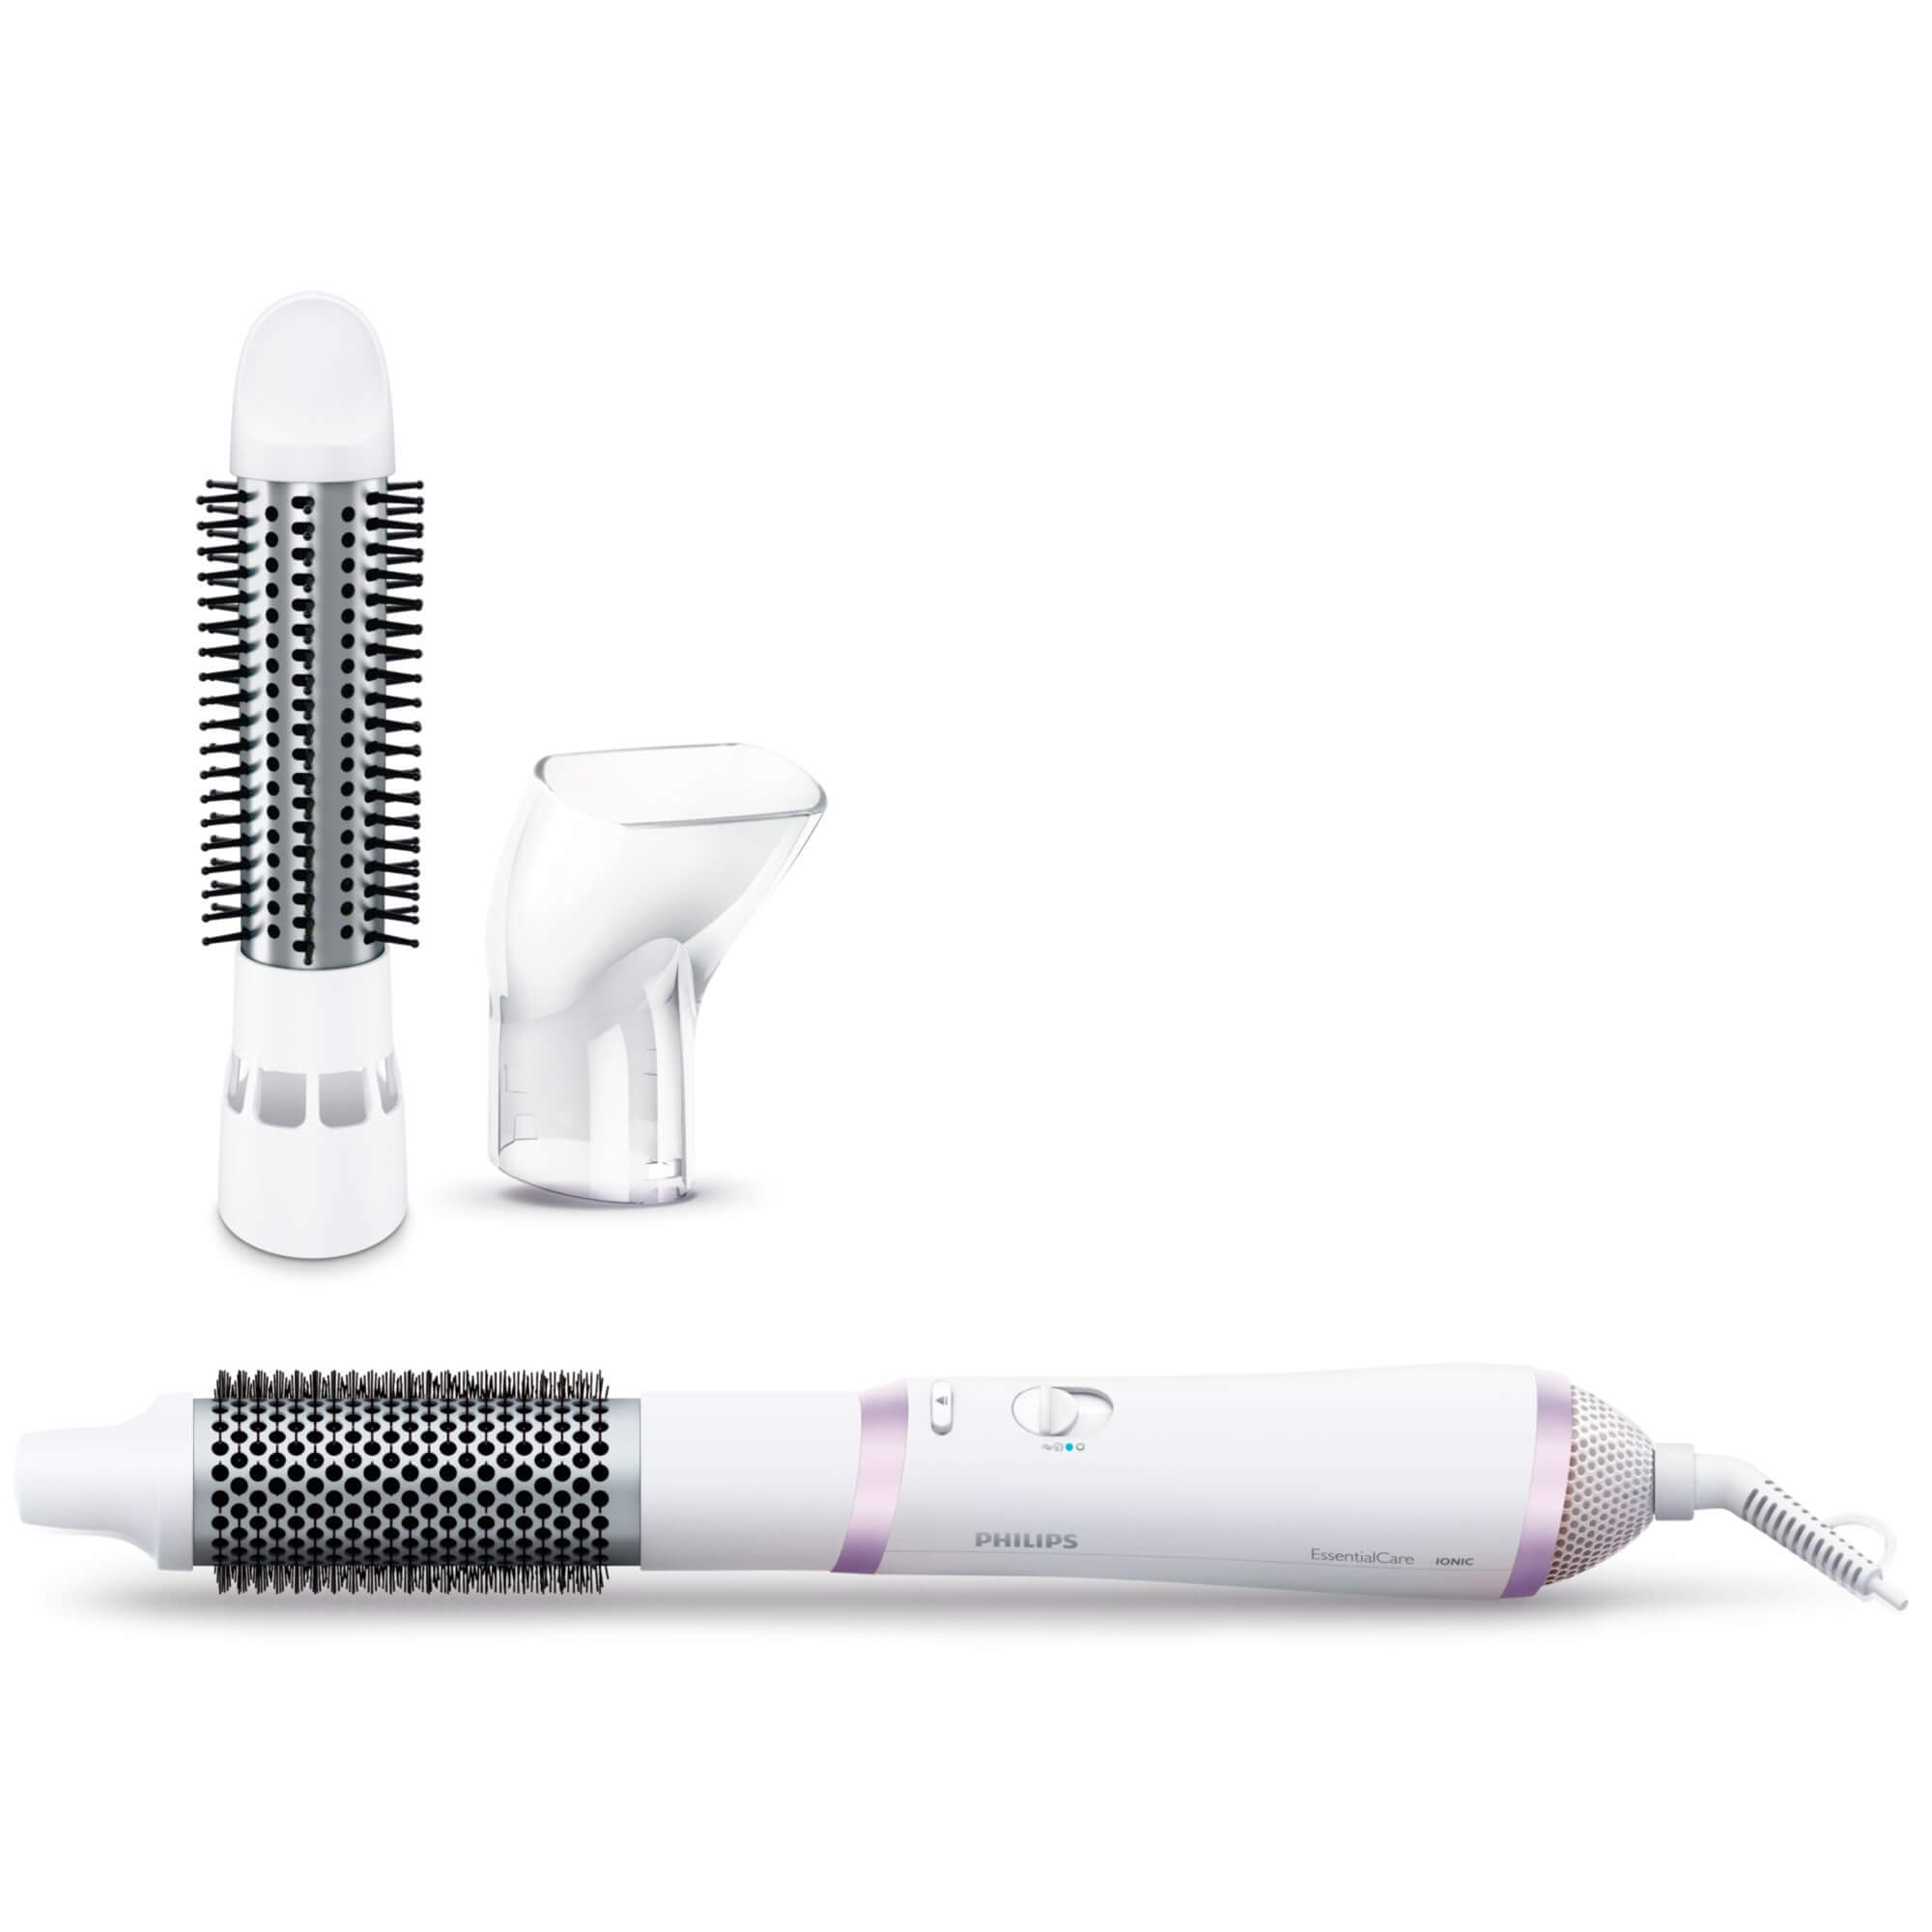 Perie cu aer cald Philips Essential Care Airstyler HP8662/00, 800 W, Ionizare, ThermoProtect, 3 accesorii, Alb